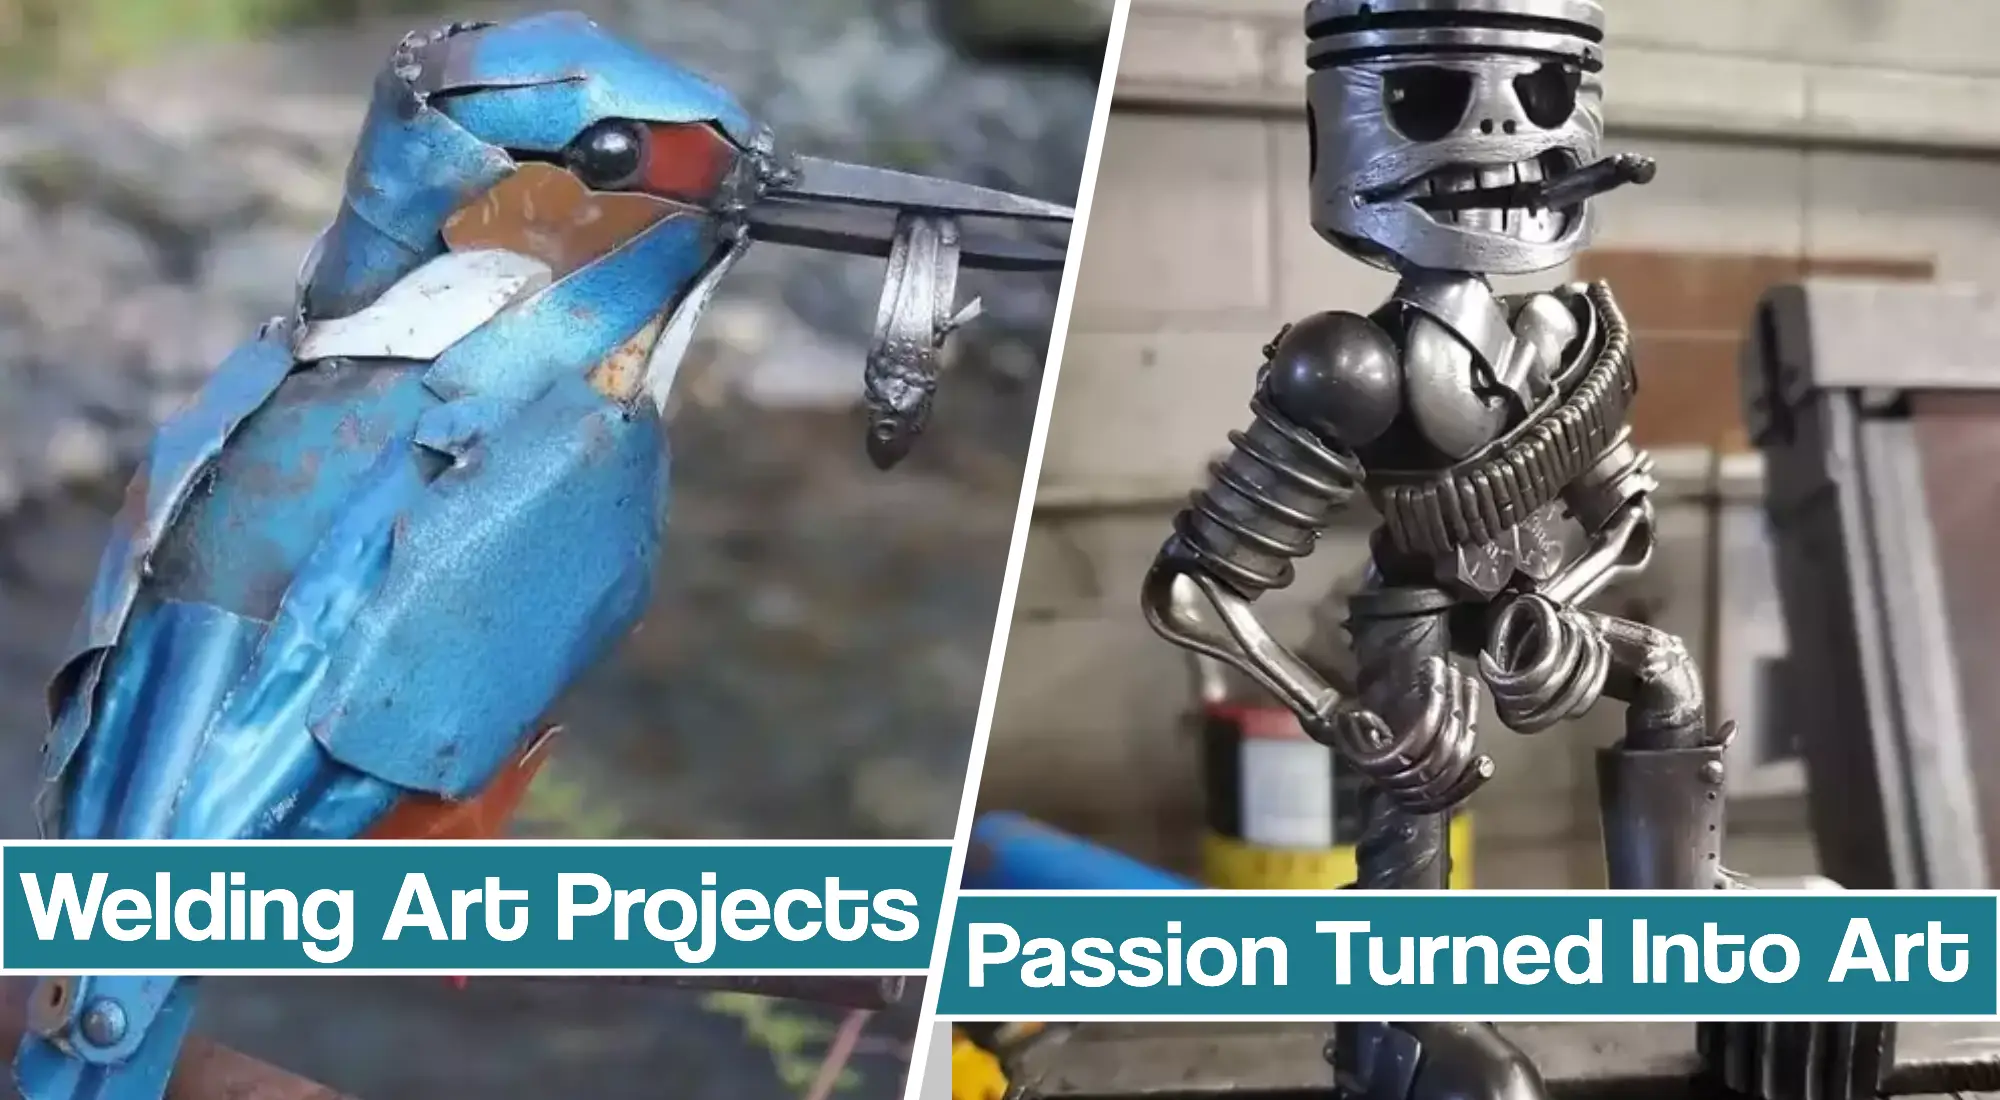 Breathtaking Welding Art Projects – 6 Artists that Turned Their Passion Into Art